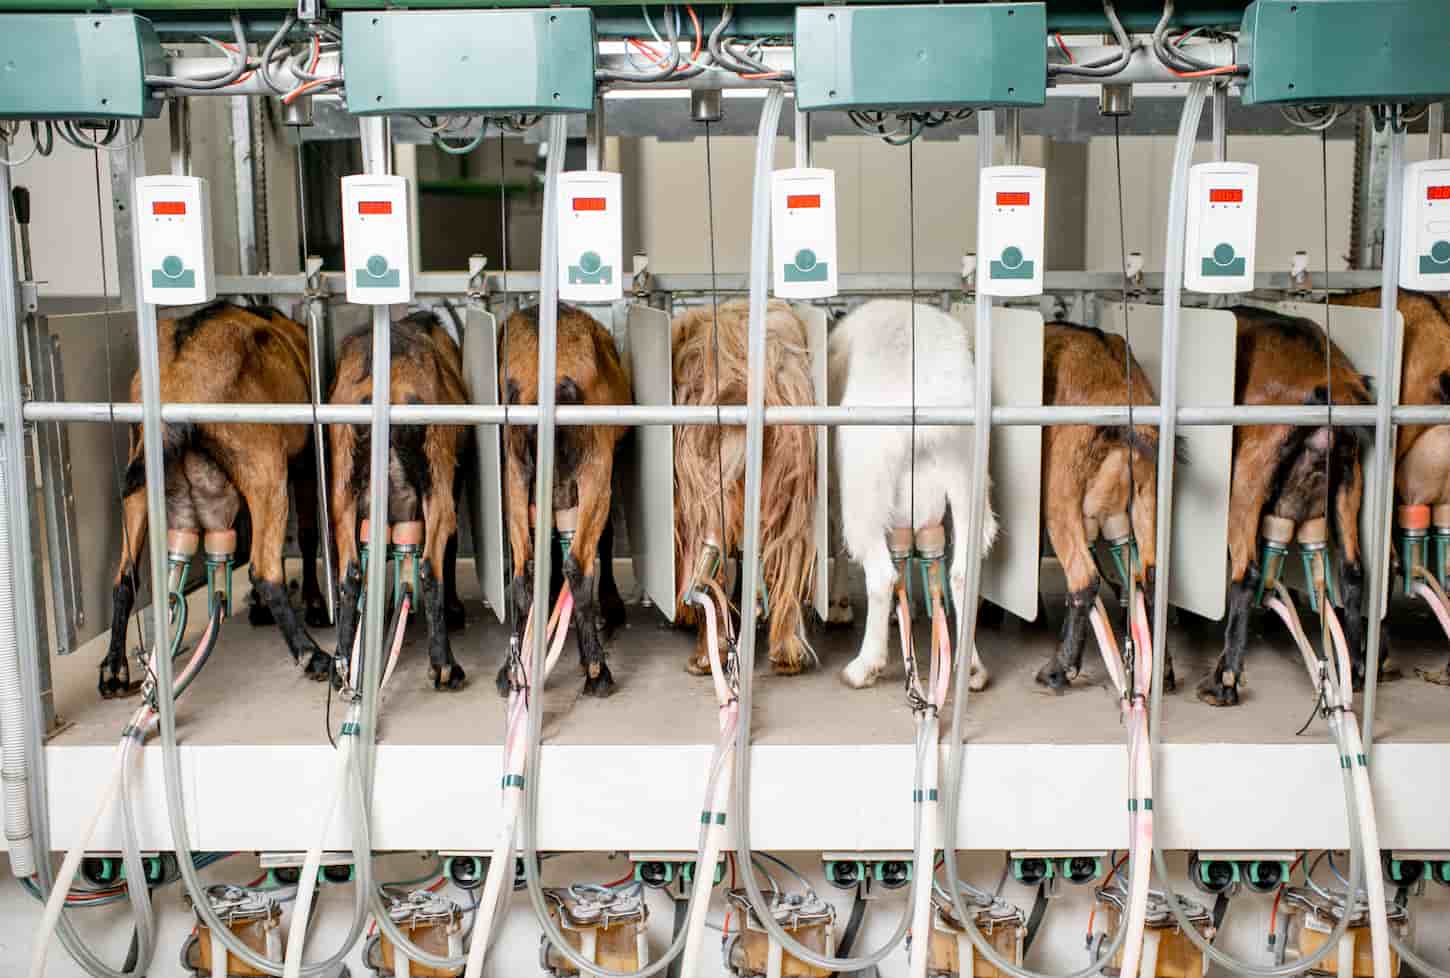 An image of goats in the automated milking line during the milking process